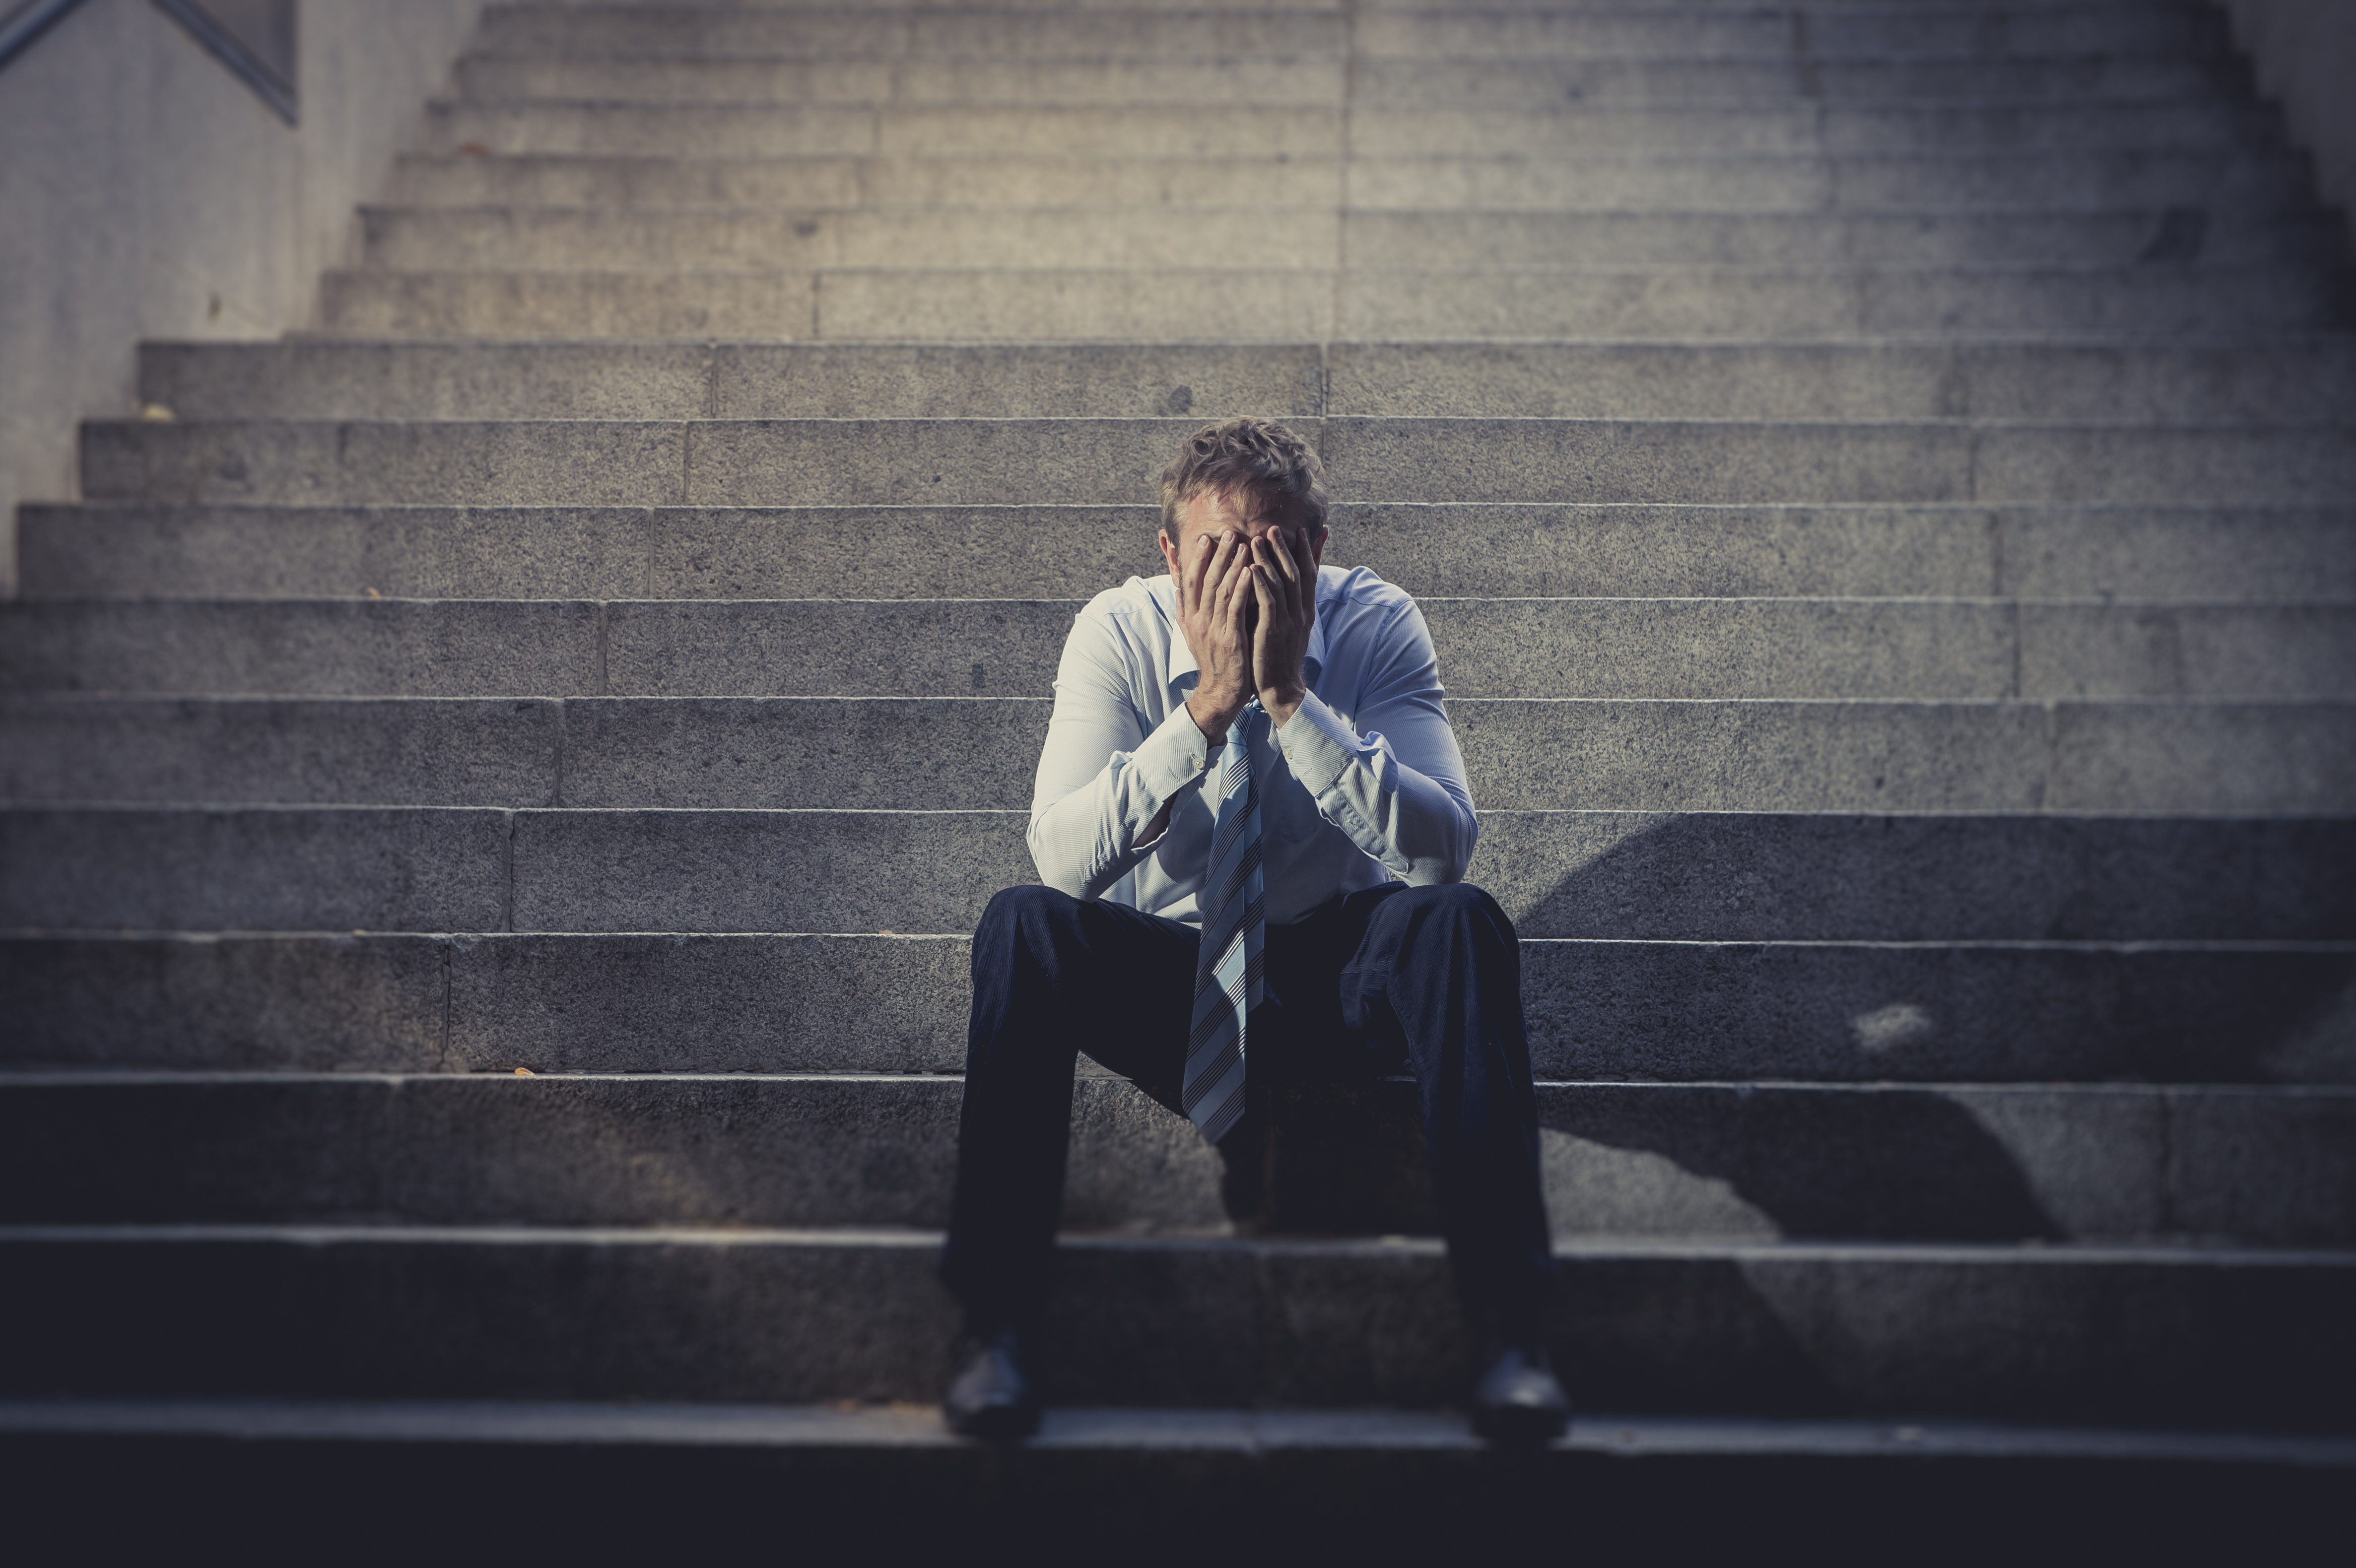 A depressed man sitting on concrete stairs | Source: Shutterstock